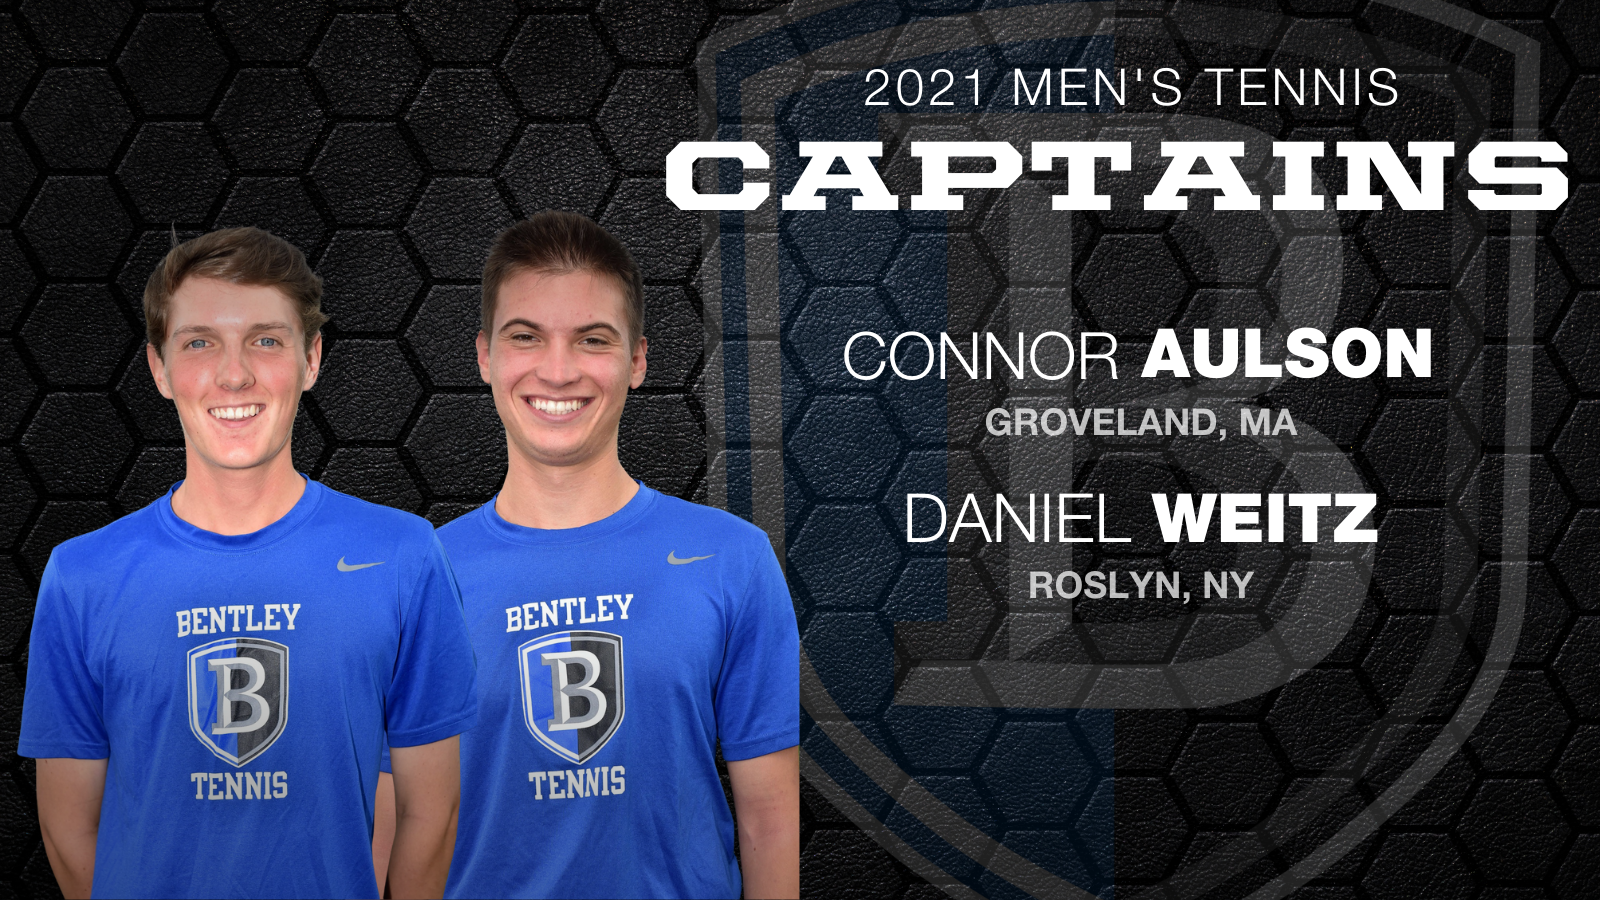 Aulson and Weitz Named Captains of the Bentley Men’s Tennis Team